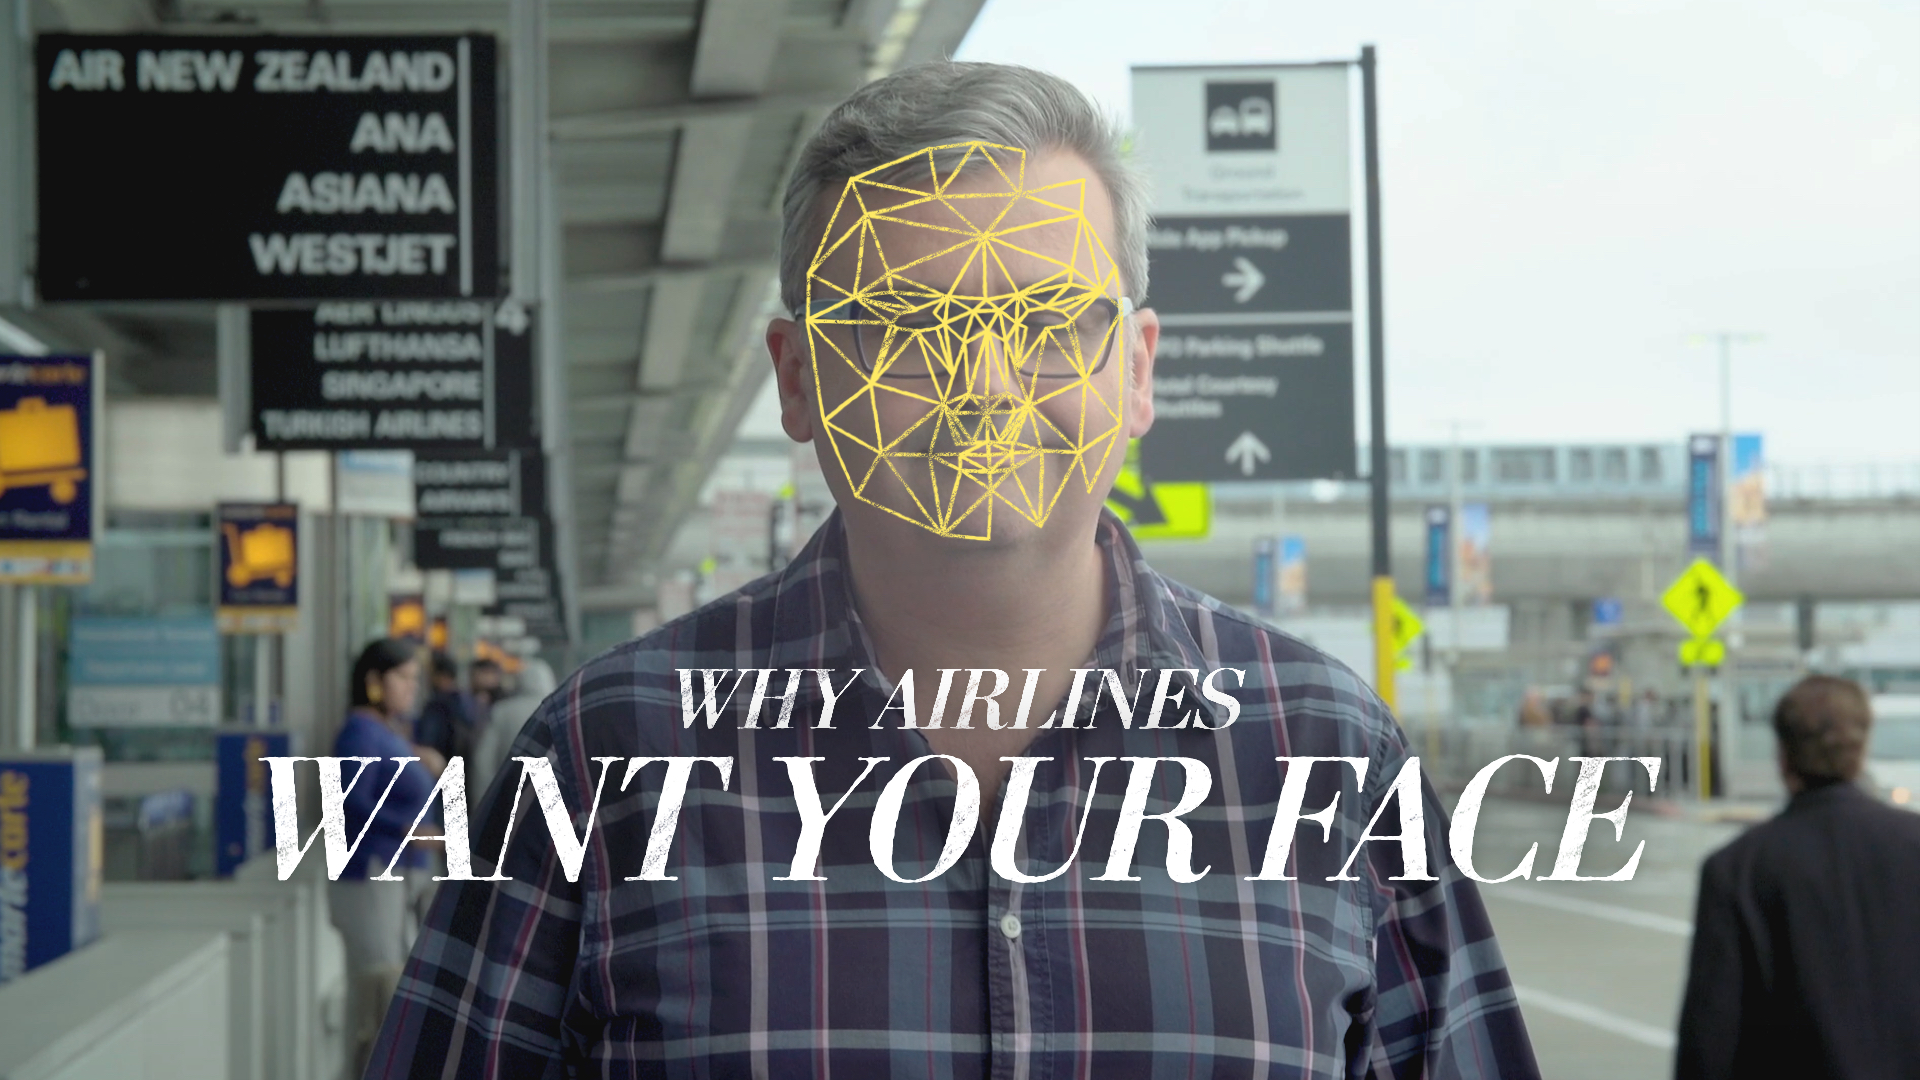 Facial Recognition at Airports, Hotels Worries Privacy Experts – Robb Report